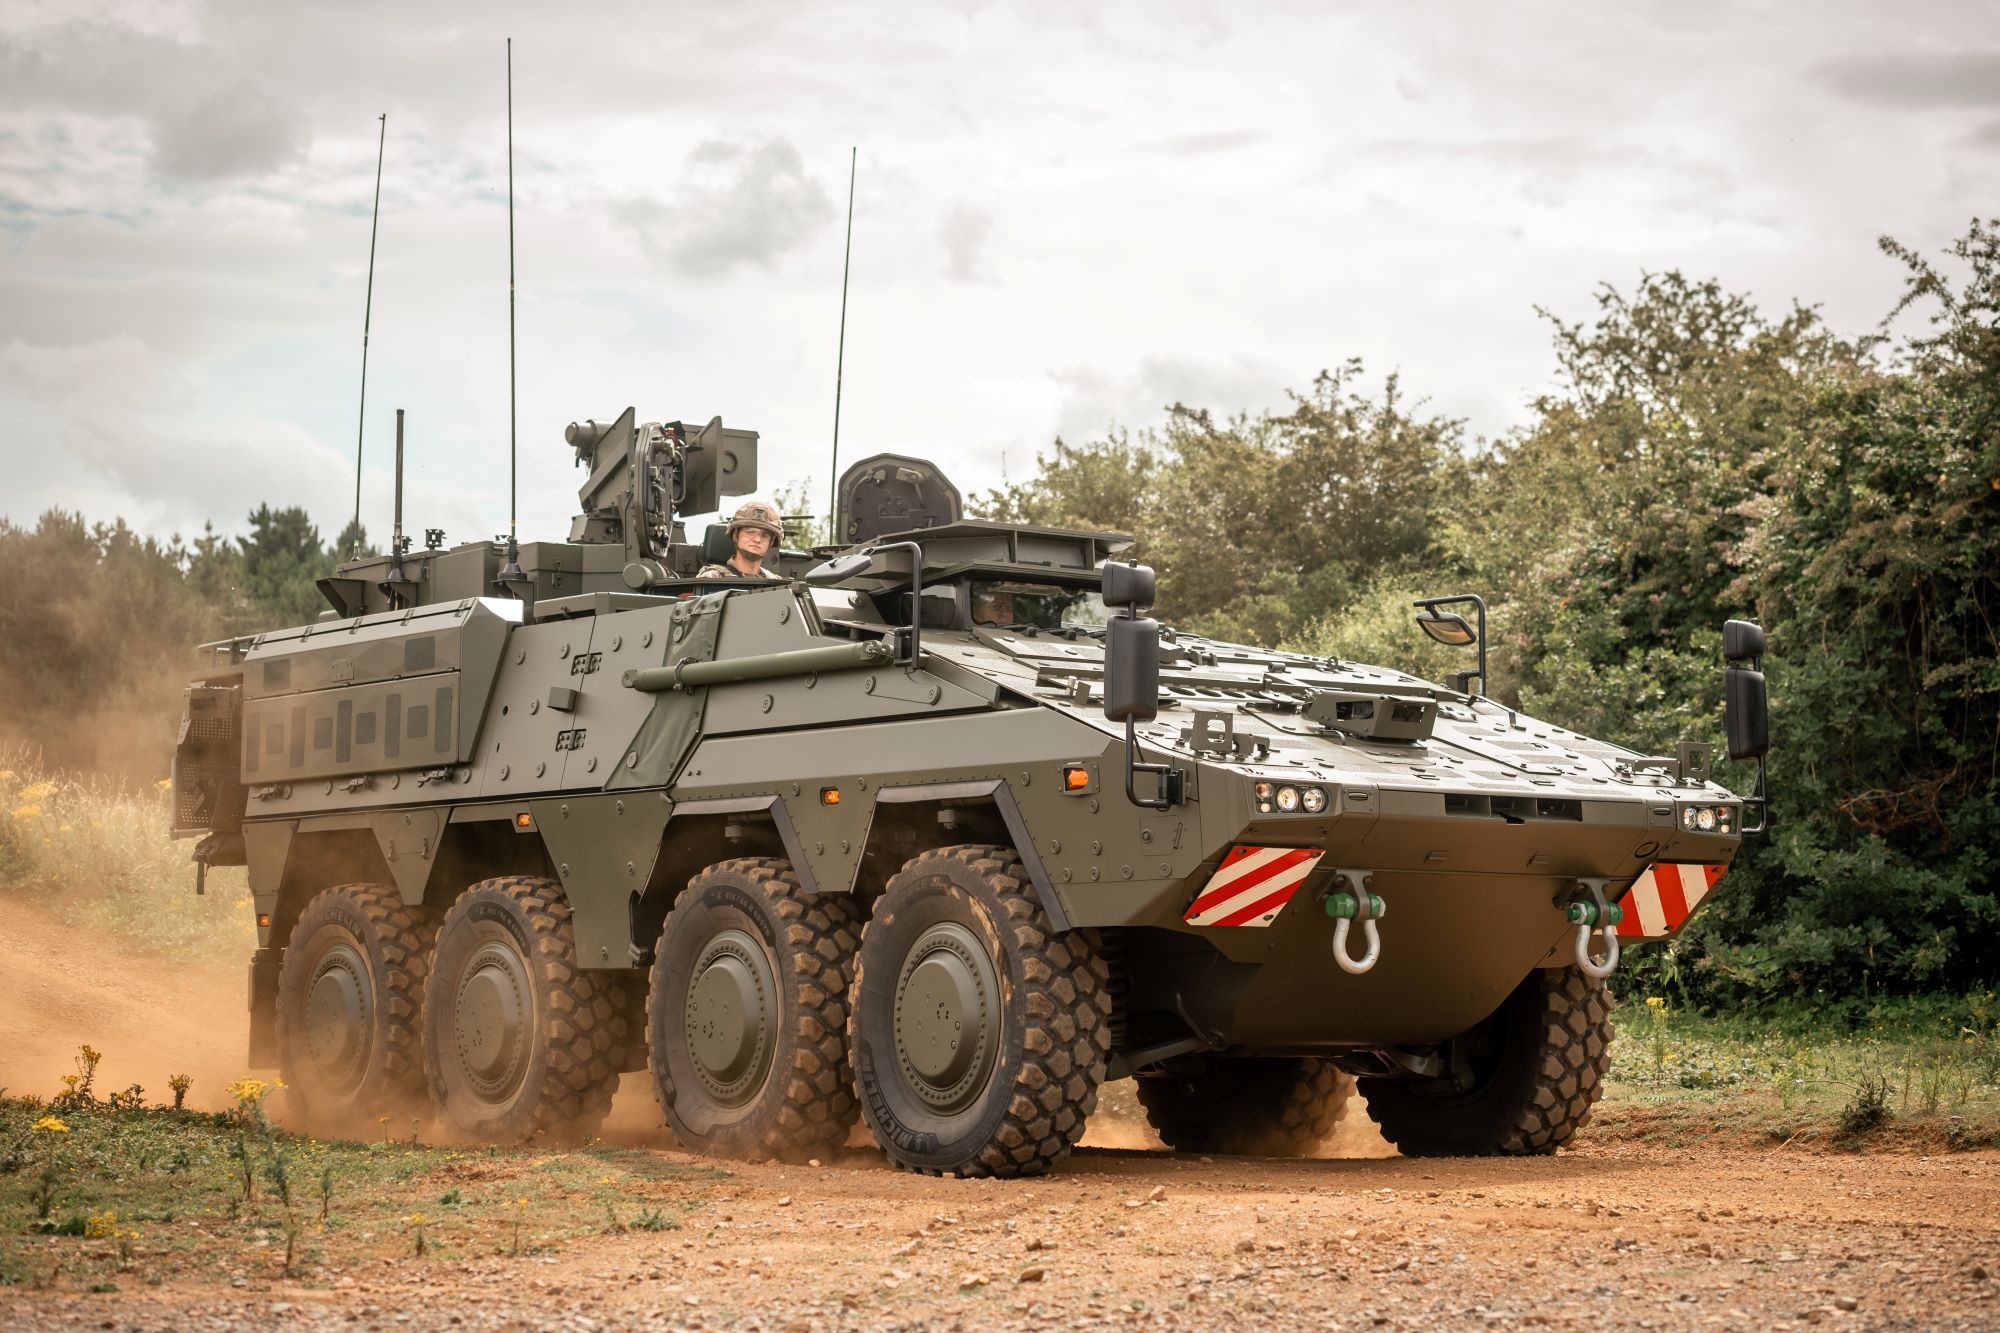 A Boxer armoured vehicle